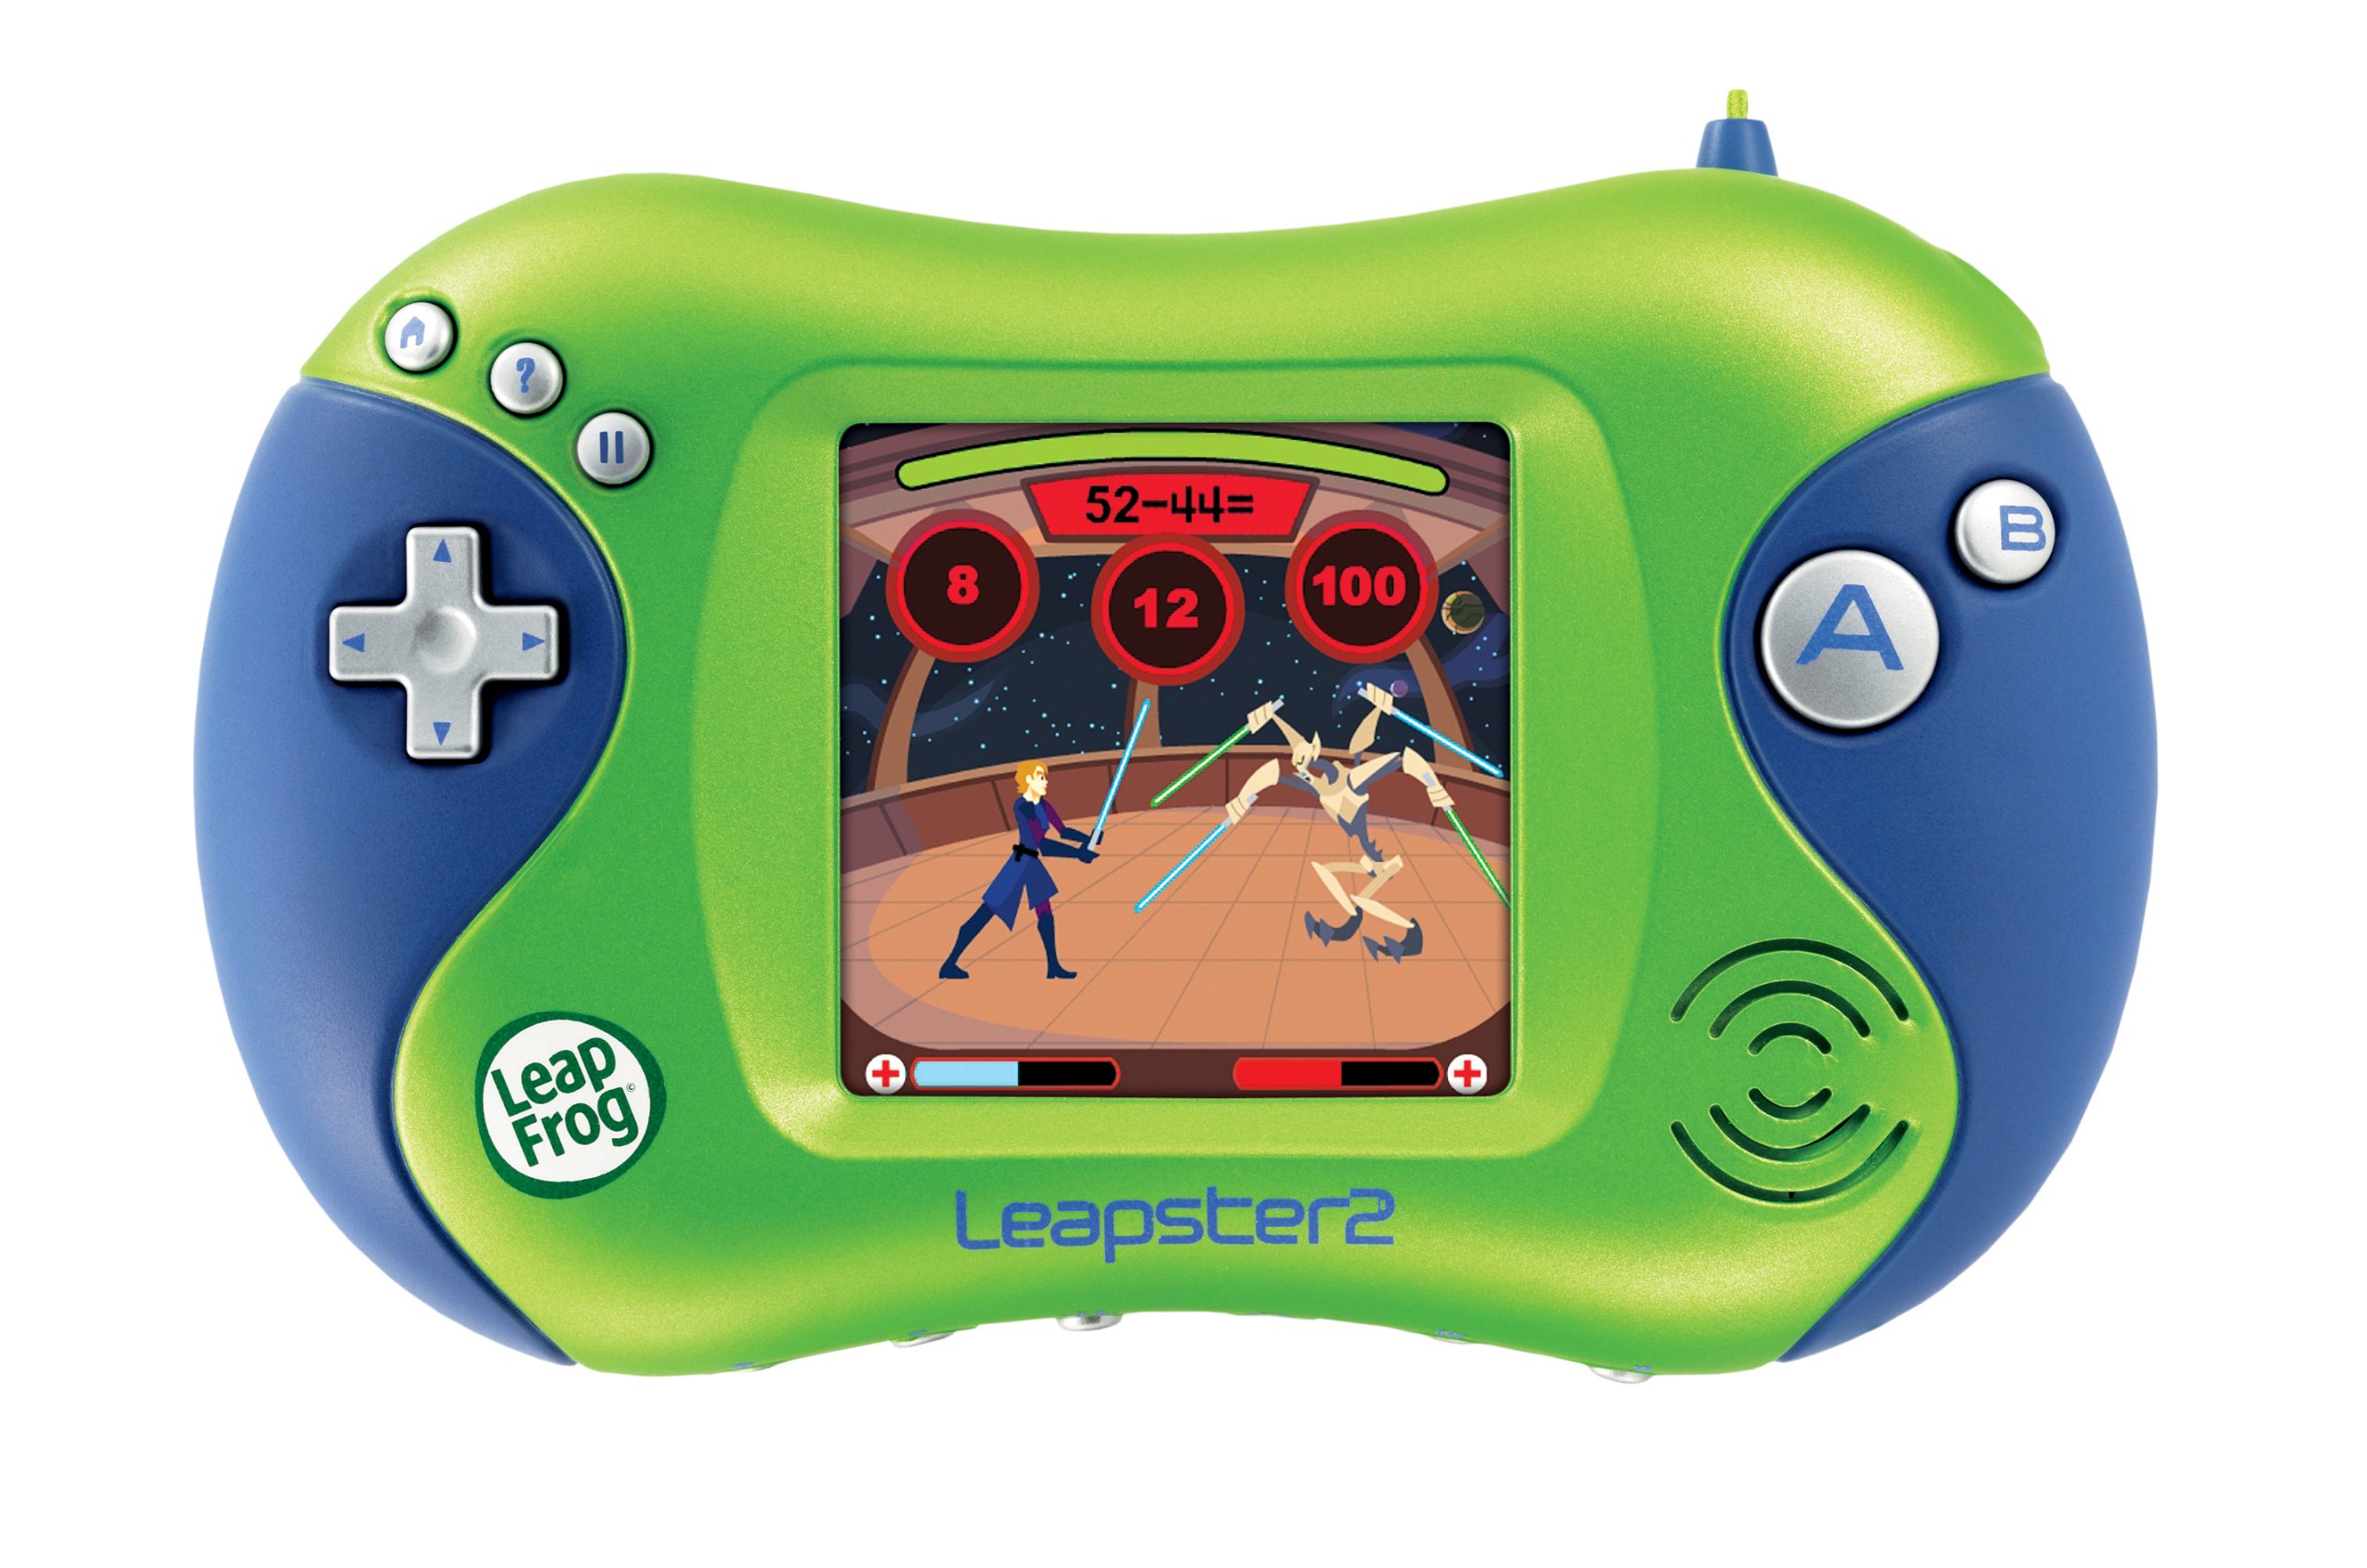 LeapFrog Leapster Learning Game Star Wars - Jedi Math